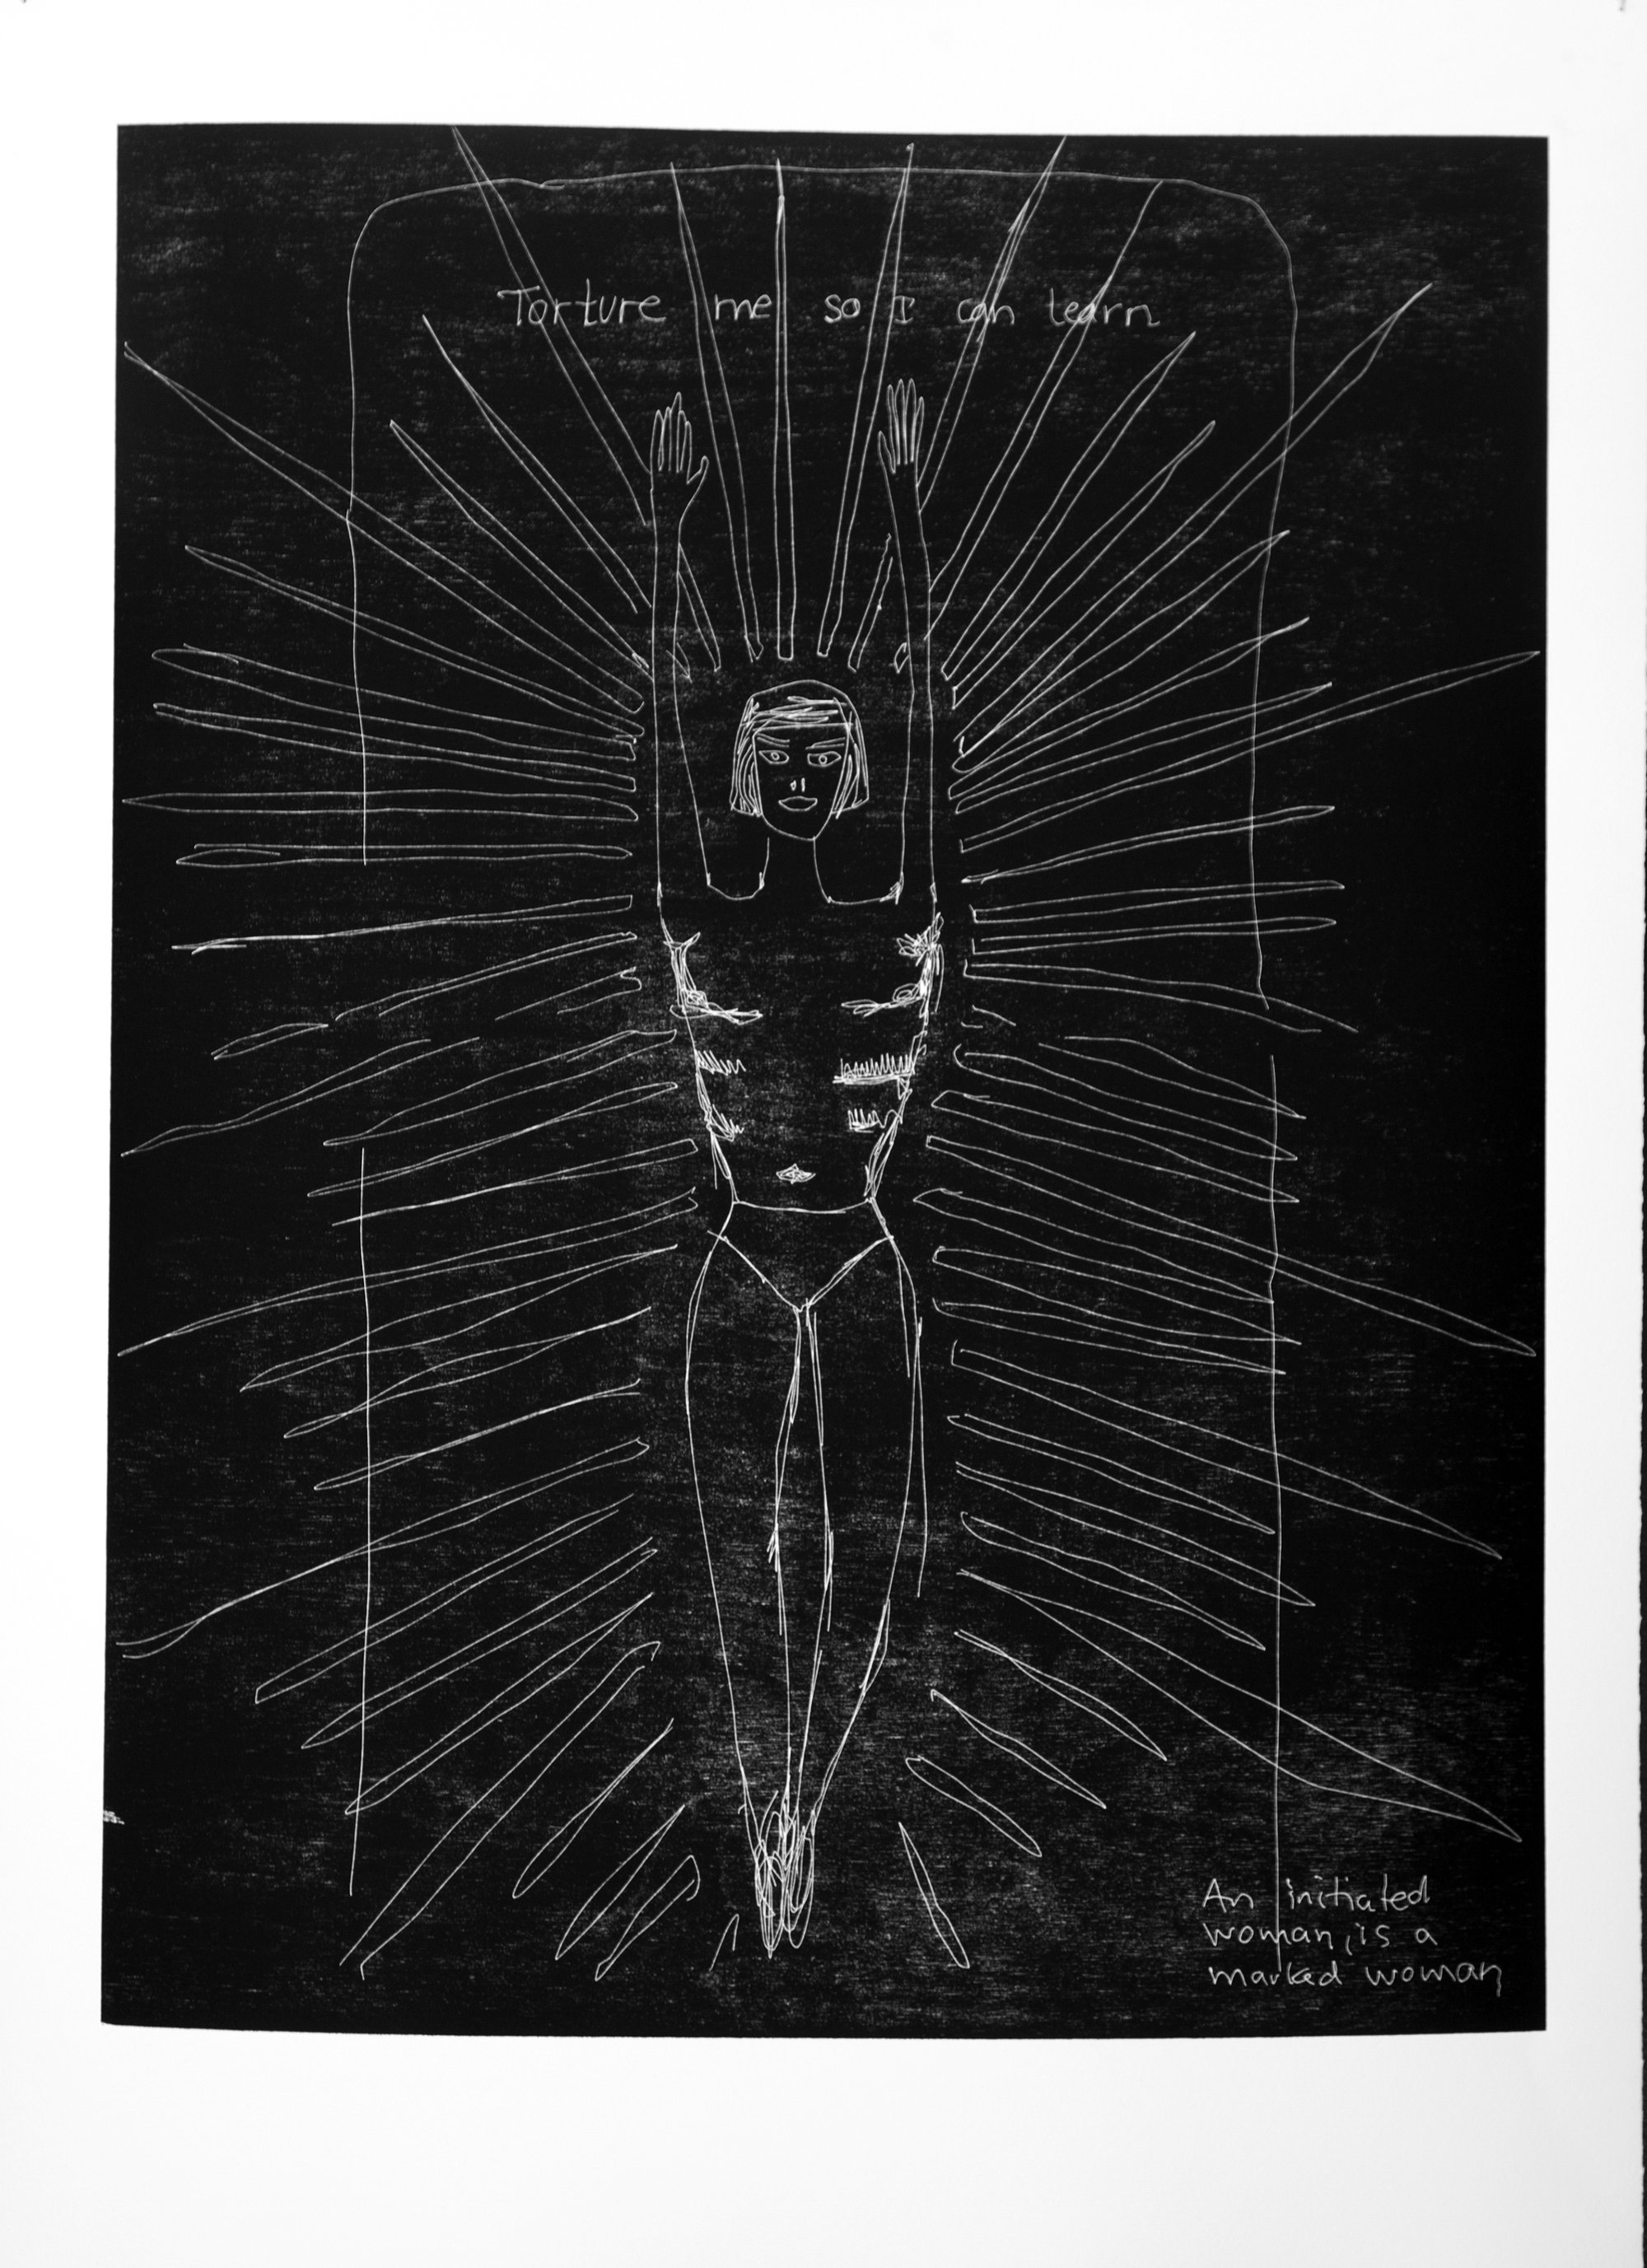 Sidsel Meineche Hansen, Torture Me So I Can Learn Miss Ovartaci, laser woodcut on paper, 62.8 x 47.9 cm (24 3/4 x 18 7/8 in), 2013